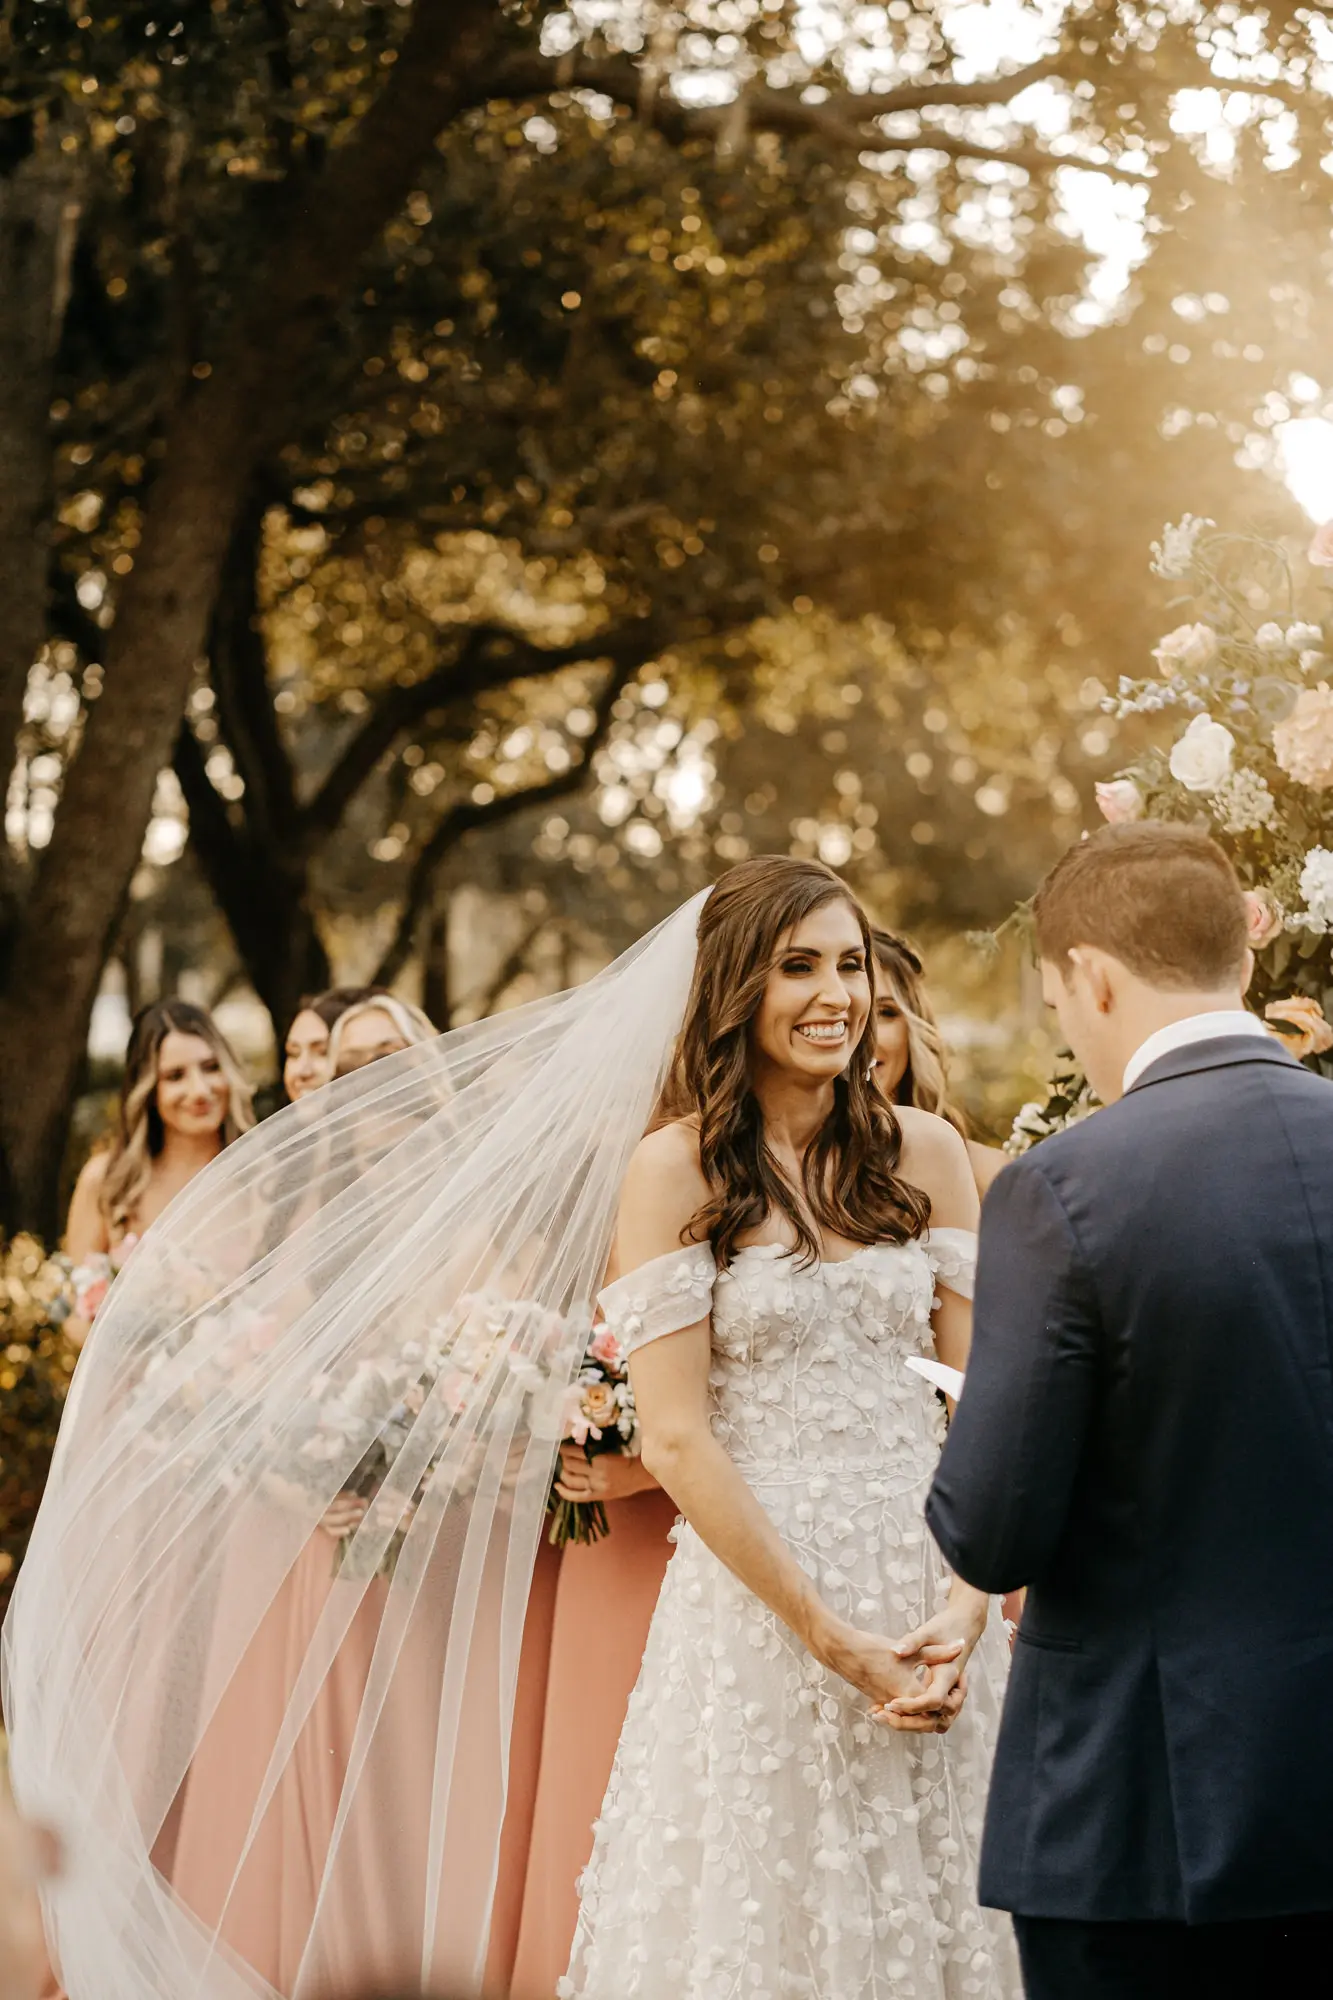 Bride and Groom Outdoor Spring Wedding Ceremony Vow Exchange | Tampa Hair and Makeup Artist Femme Akoi Beauty Studio